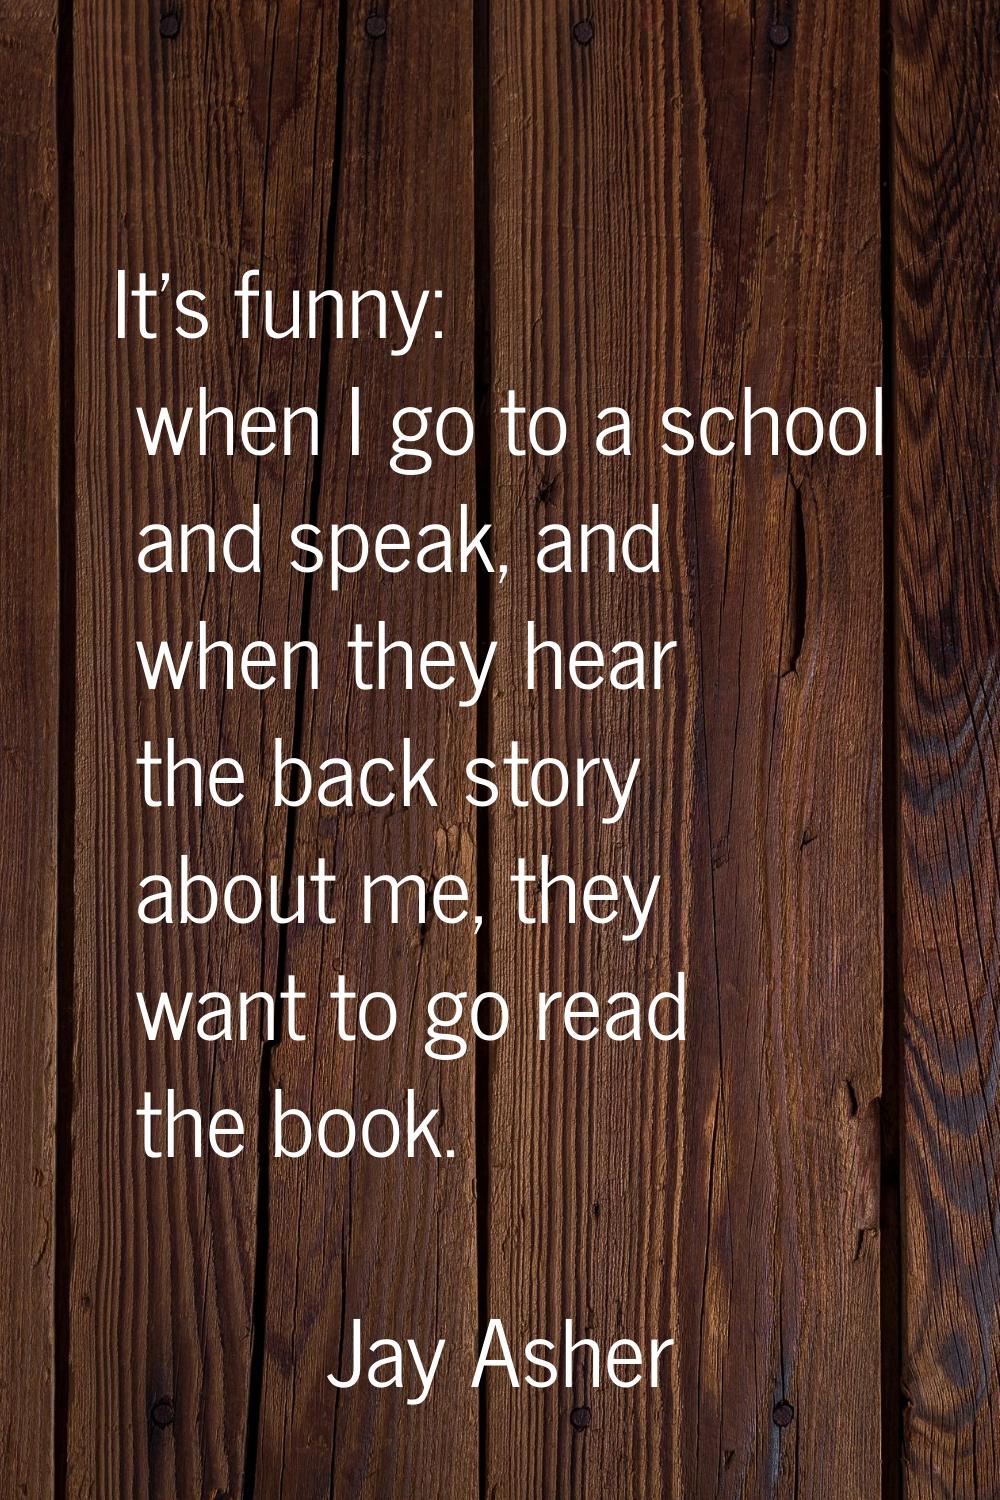 It's funny: when I go to a school and speak, and when they hear the back story about me, they want 